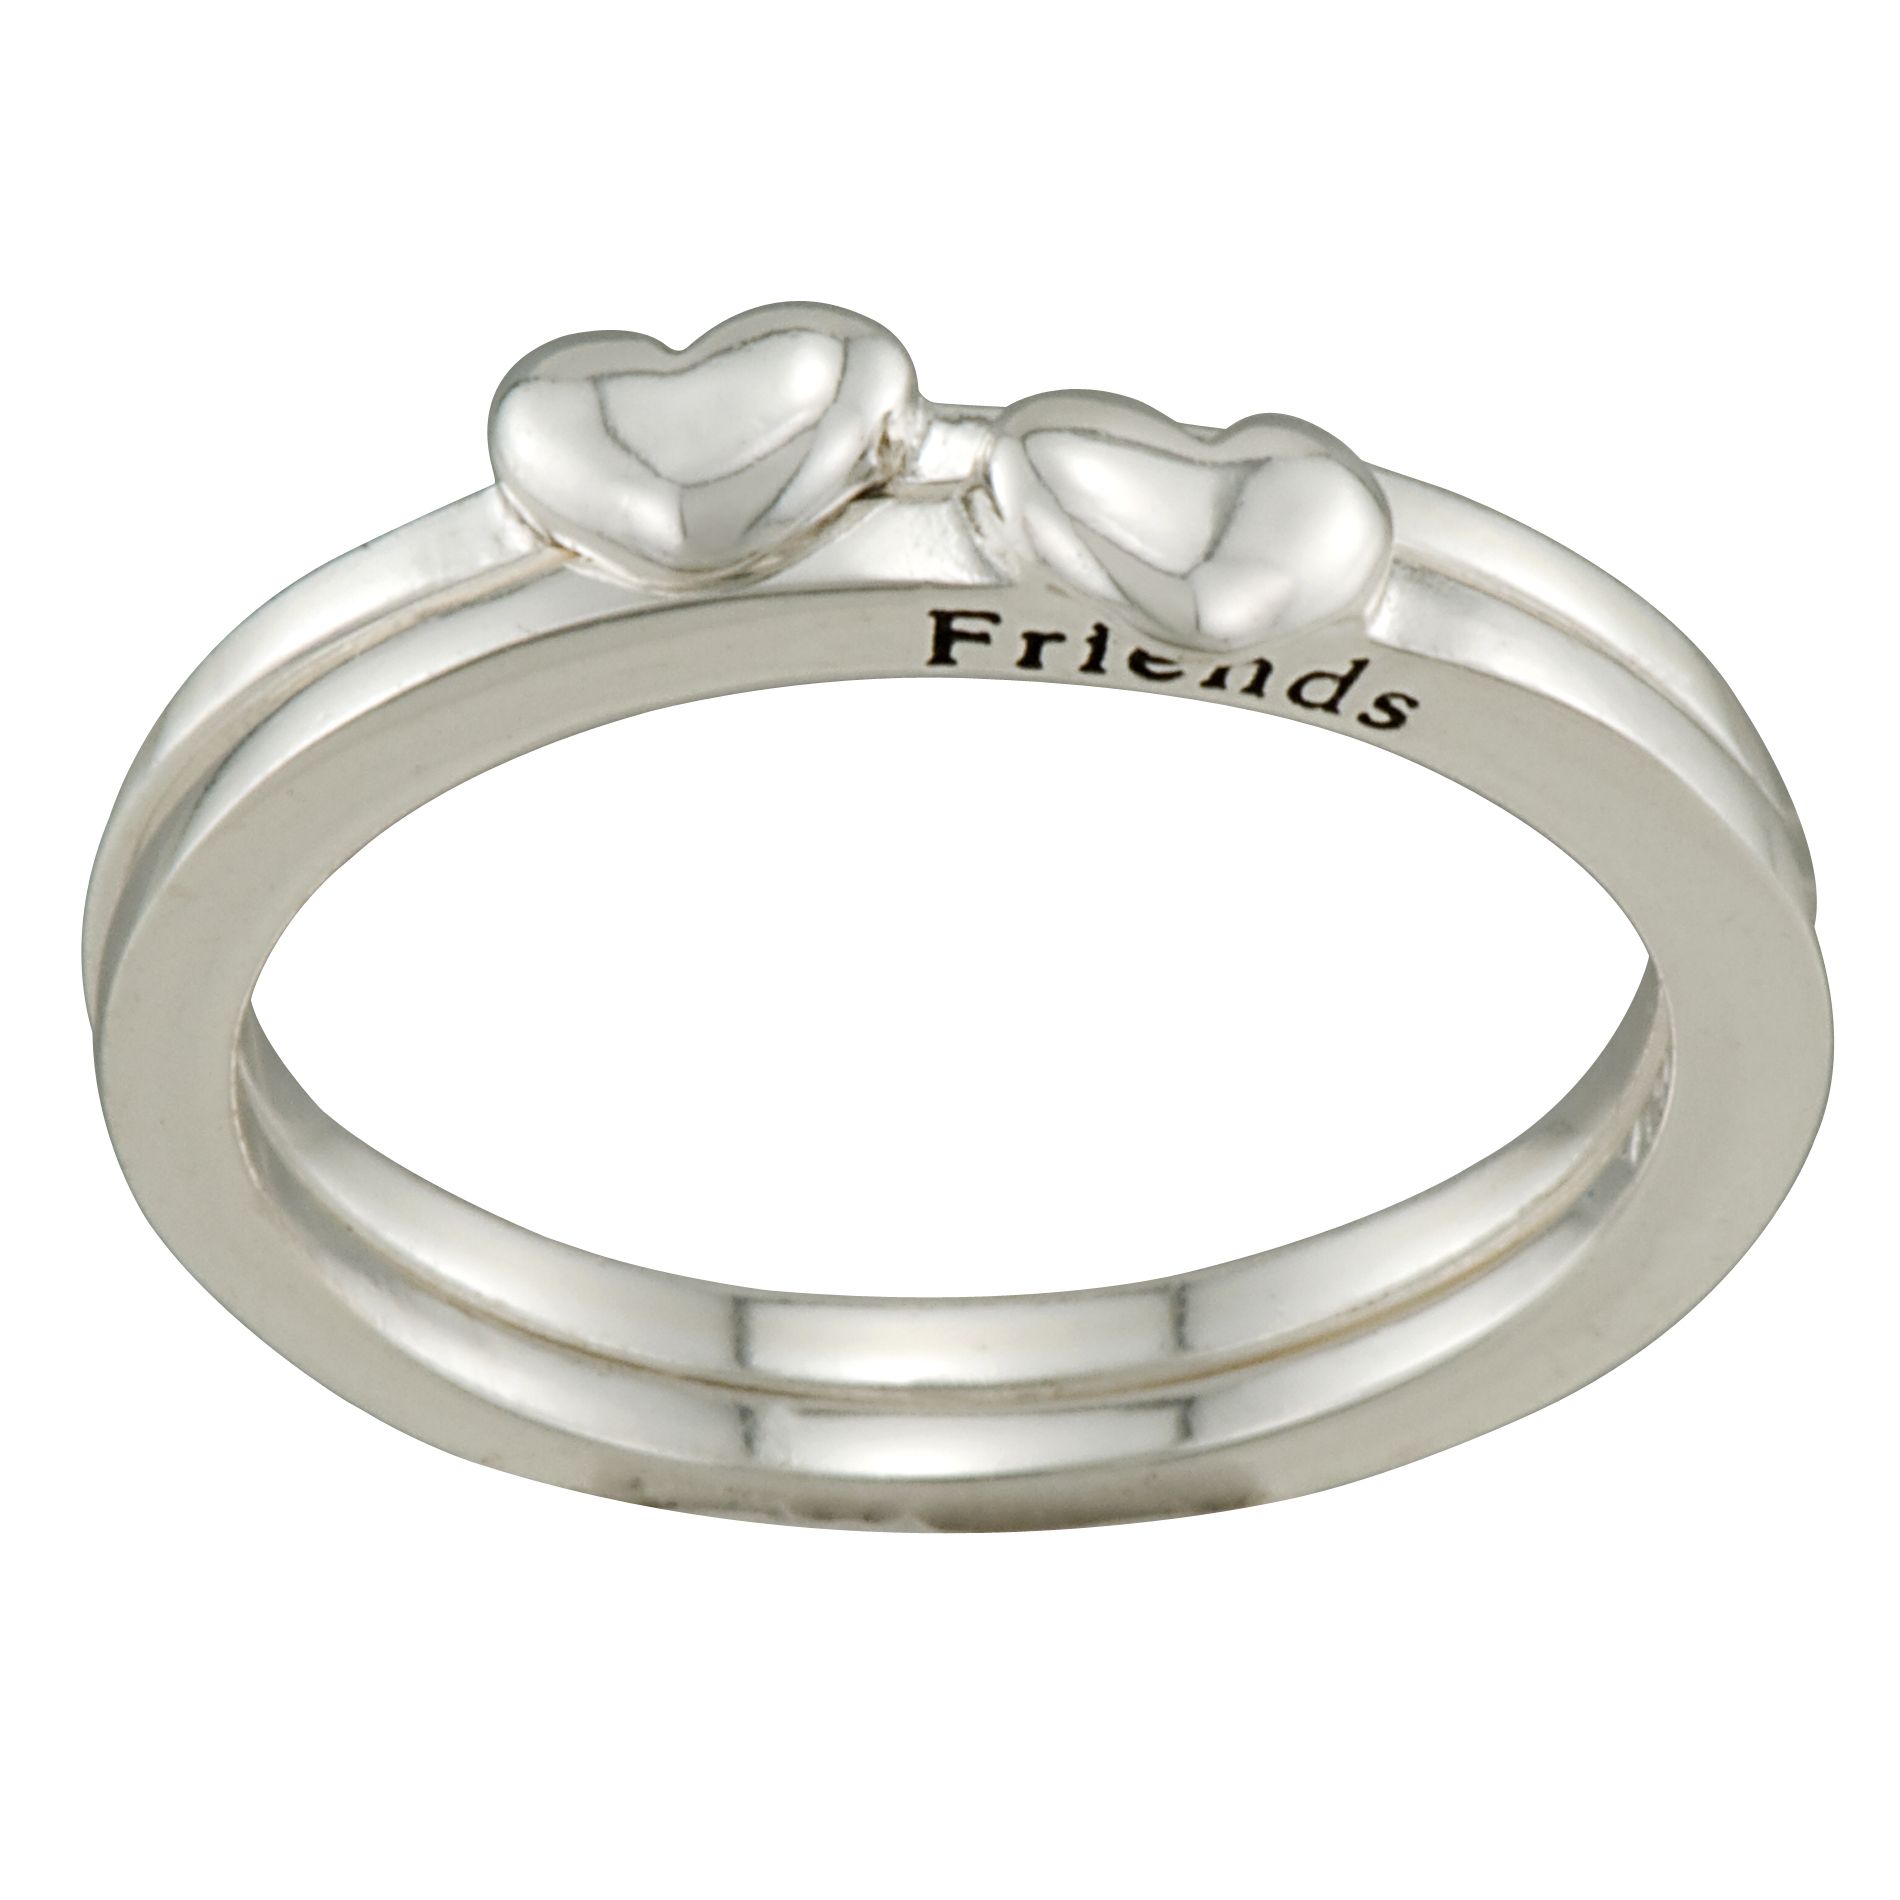 Reflections Best Friend Heart Accent Ring in Sterling Silver